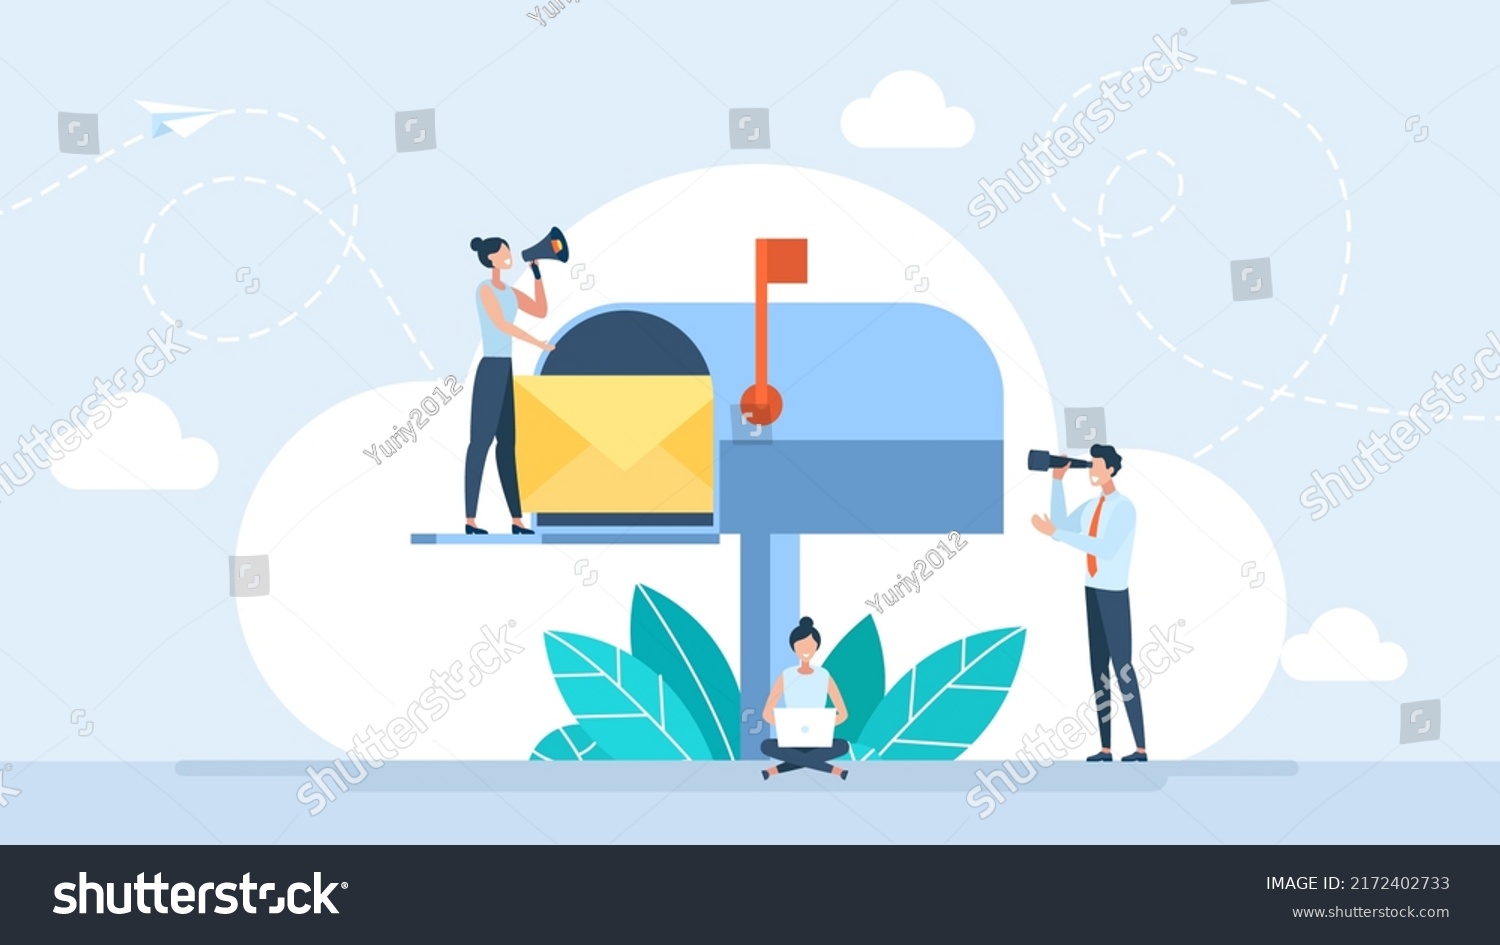 Business correspondence, subscription. Mailbox with letter in envelope. Letterbox. Inbox mail and mailbox. Tiny people are happy to receive the letter. Open post box. Flat design. Vector illustration #2172402733